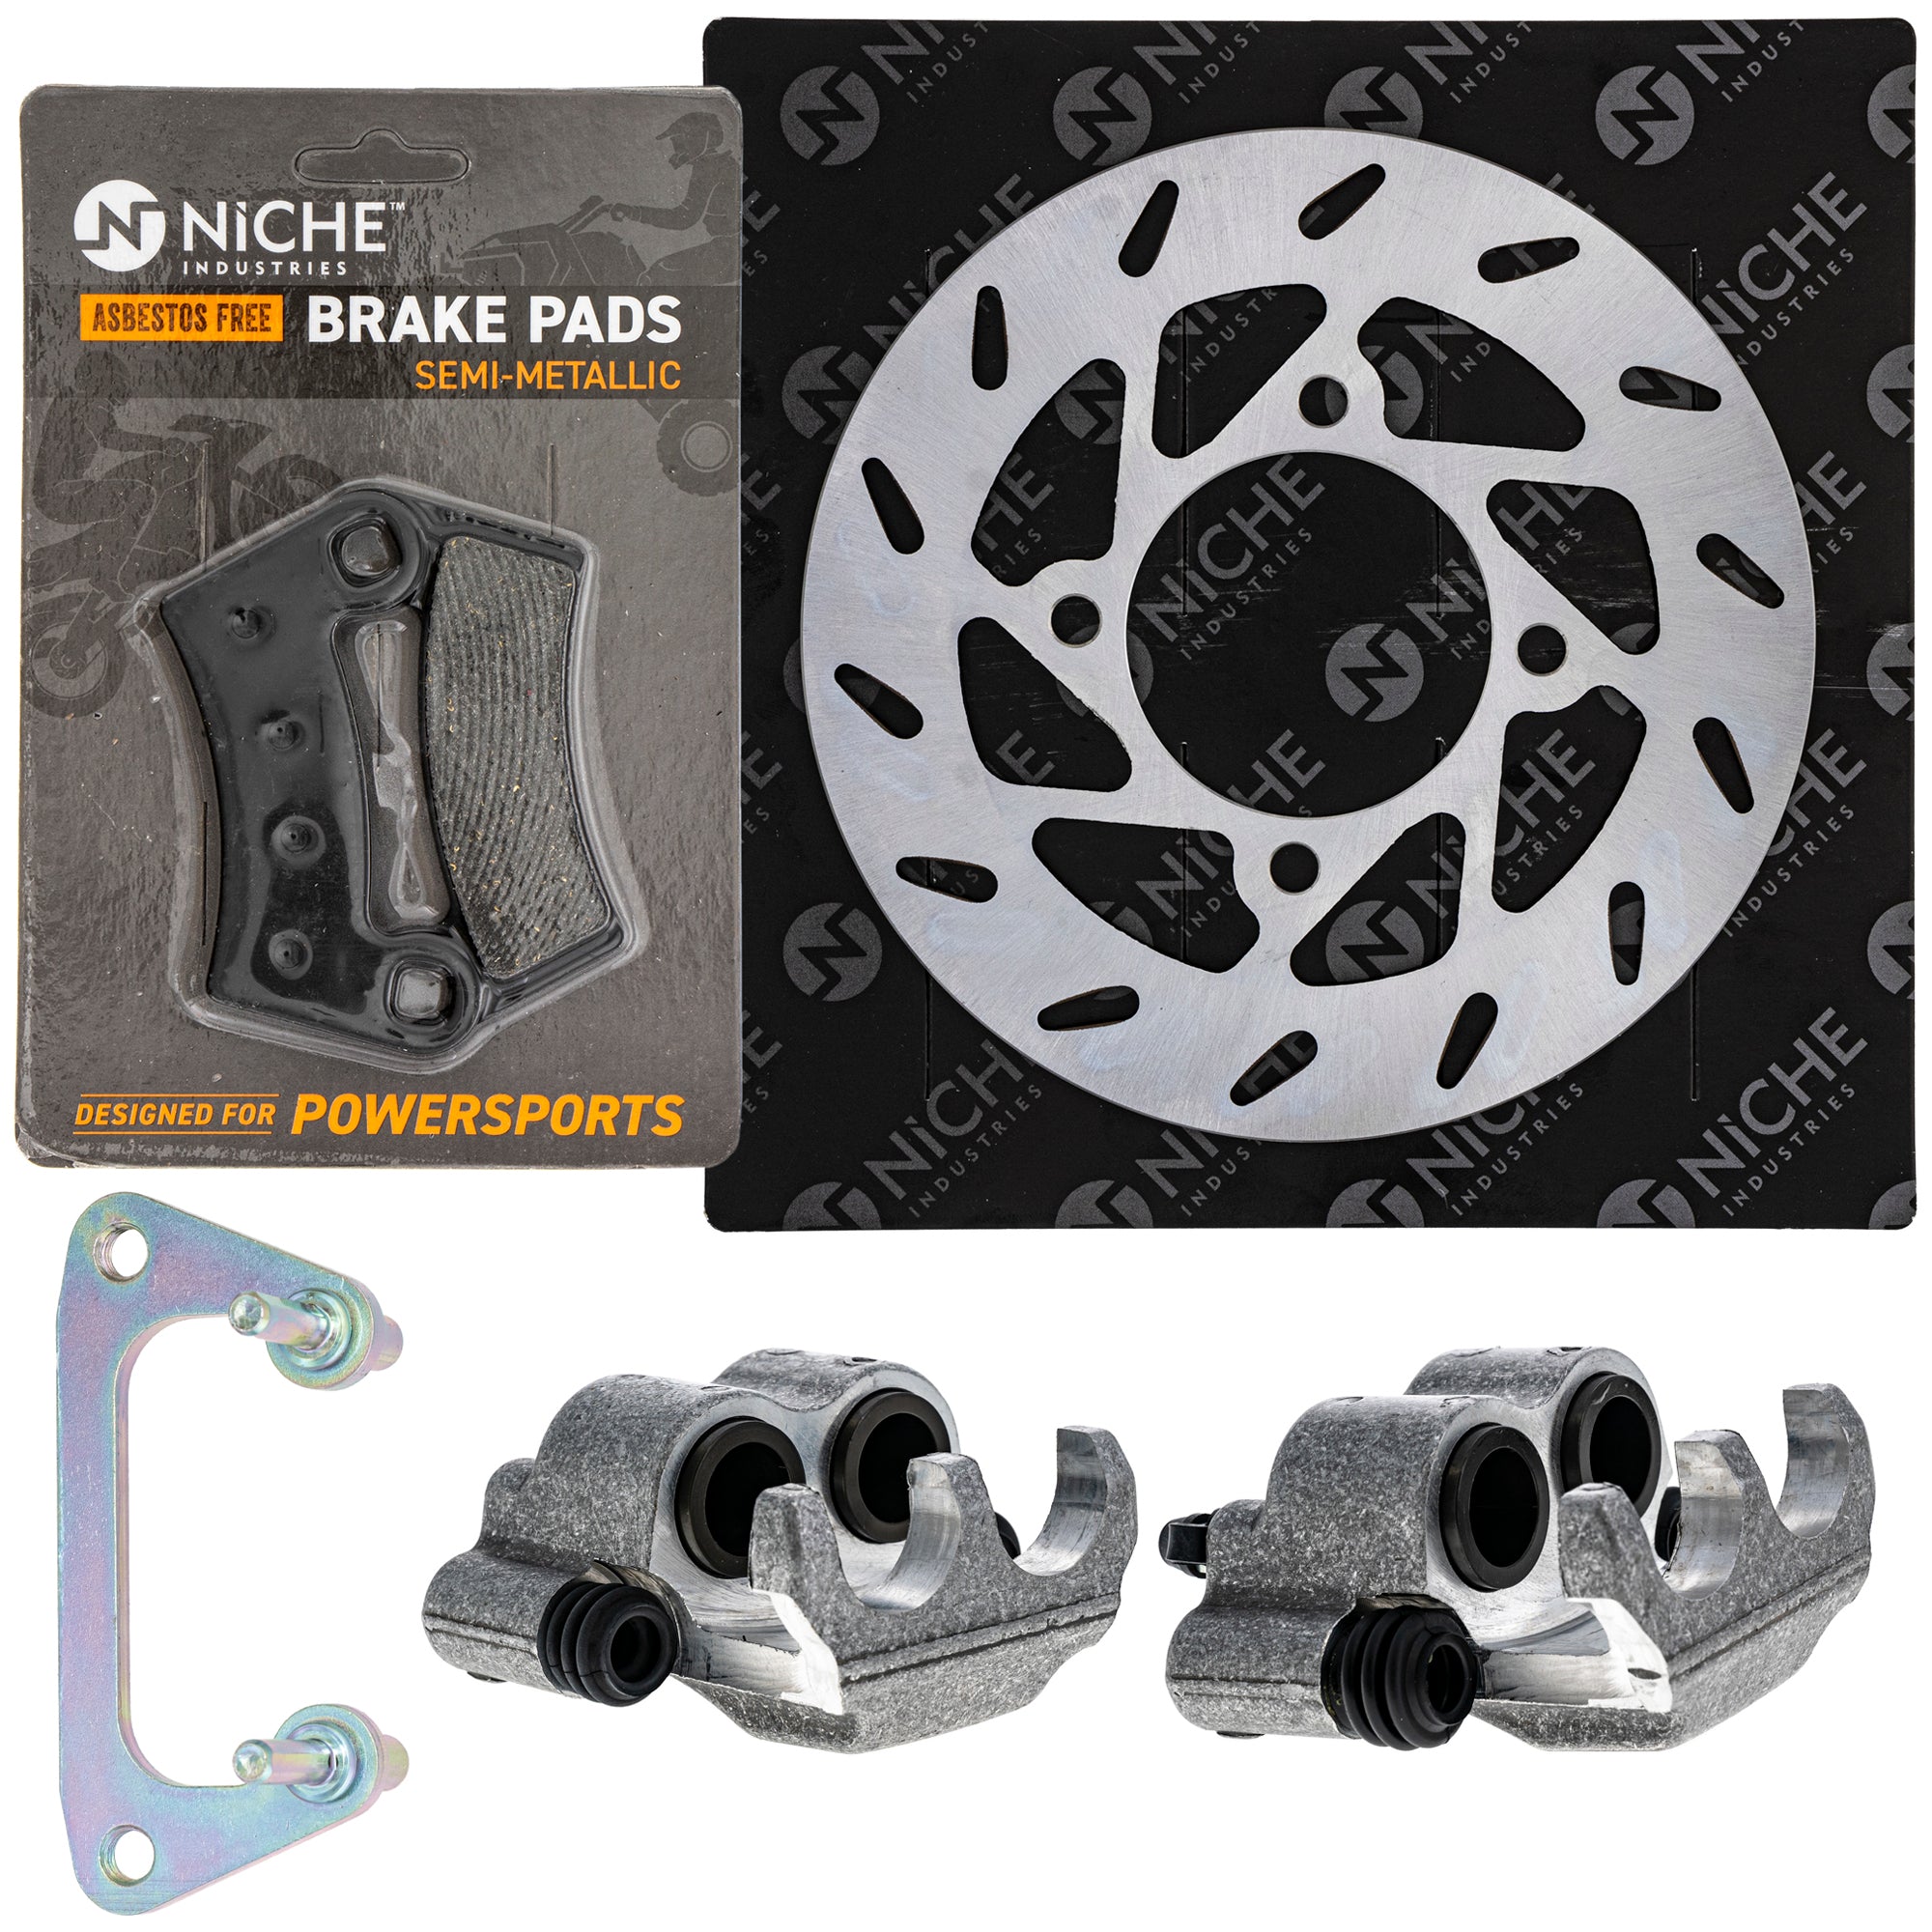 Front Brakes Rebuild Kit - Calipers, Rotors, Pads for zOTHER Polaris Outlaw NICHE MK1007964